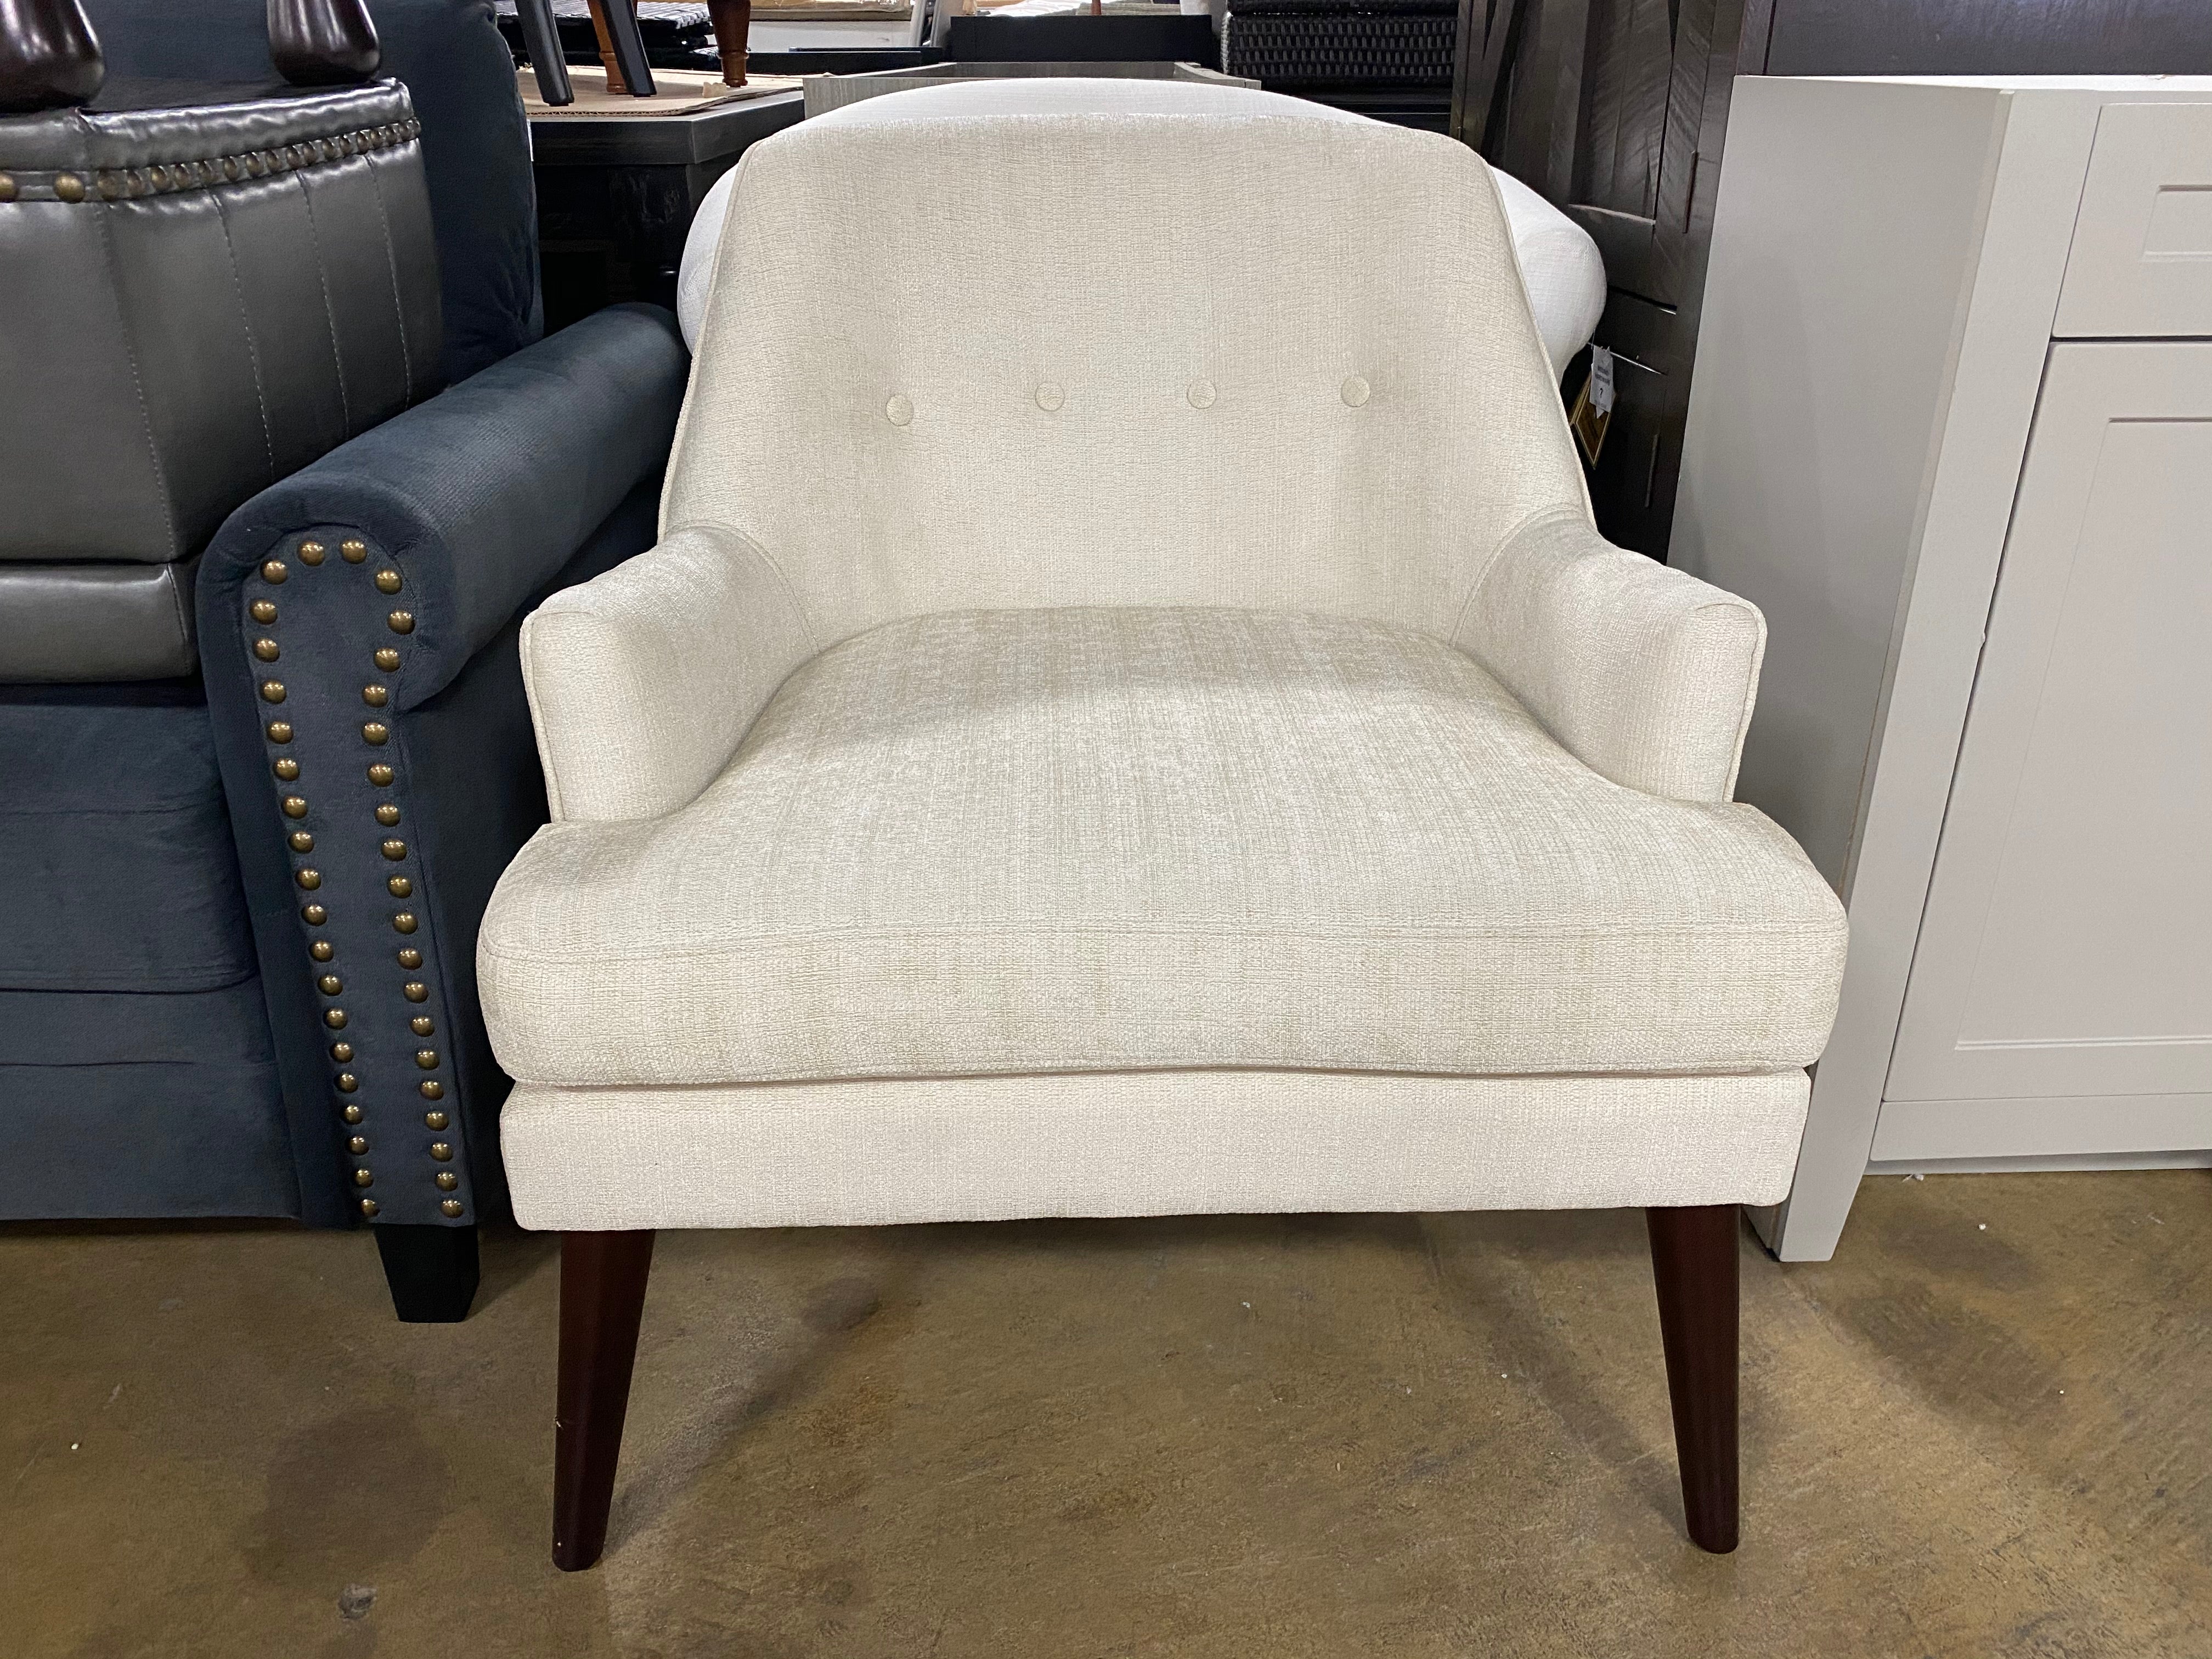 Beige Polyester Pearson Armchair